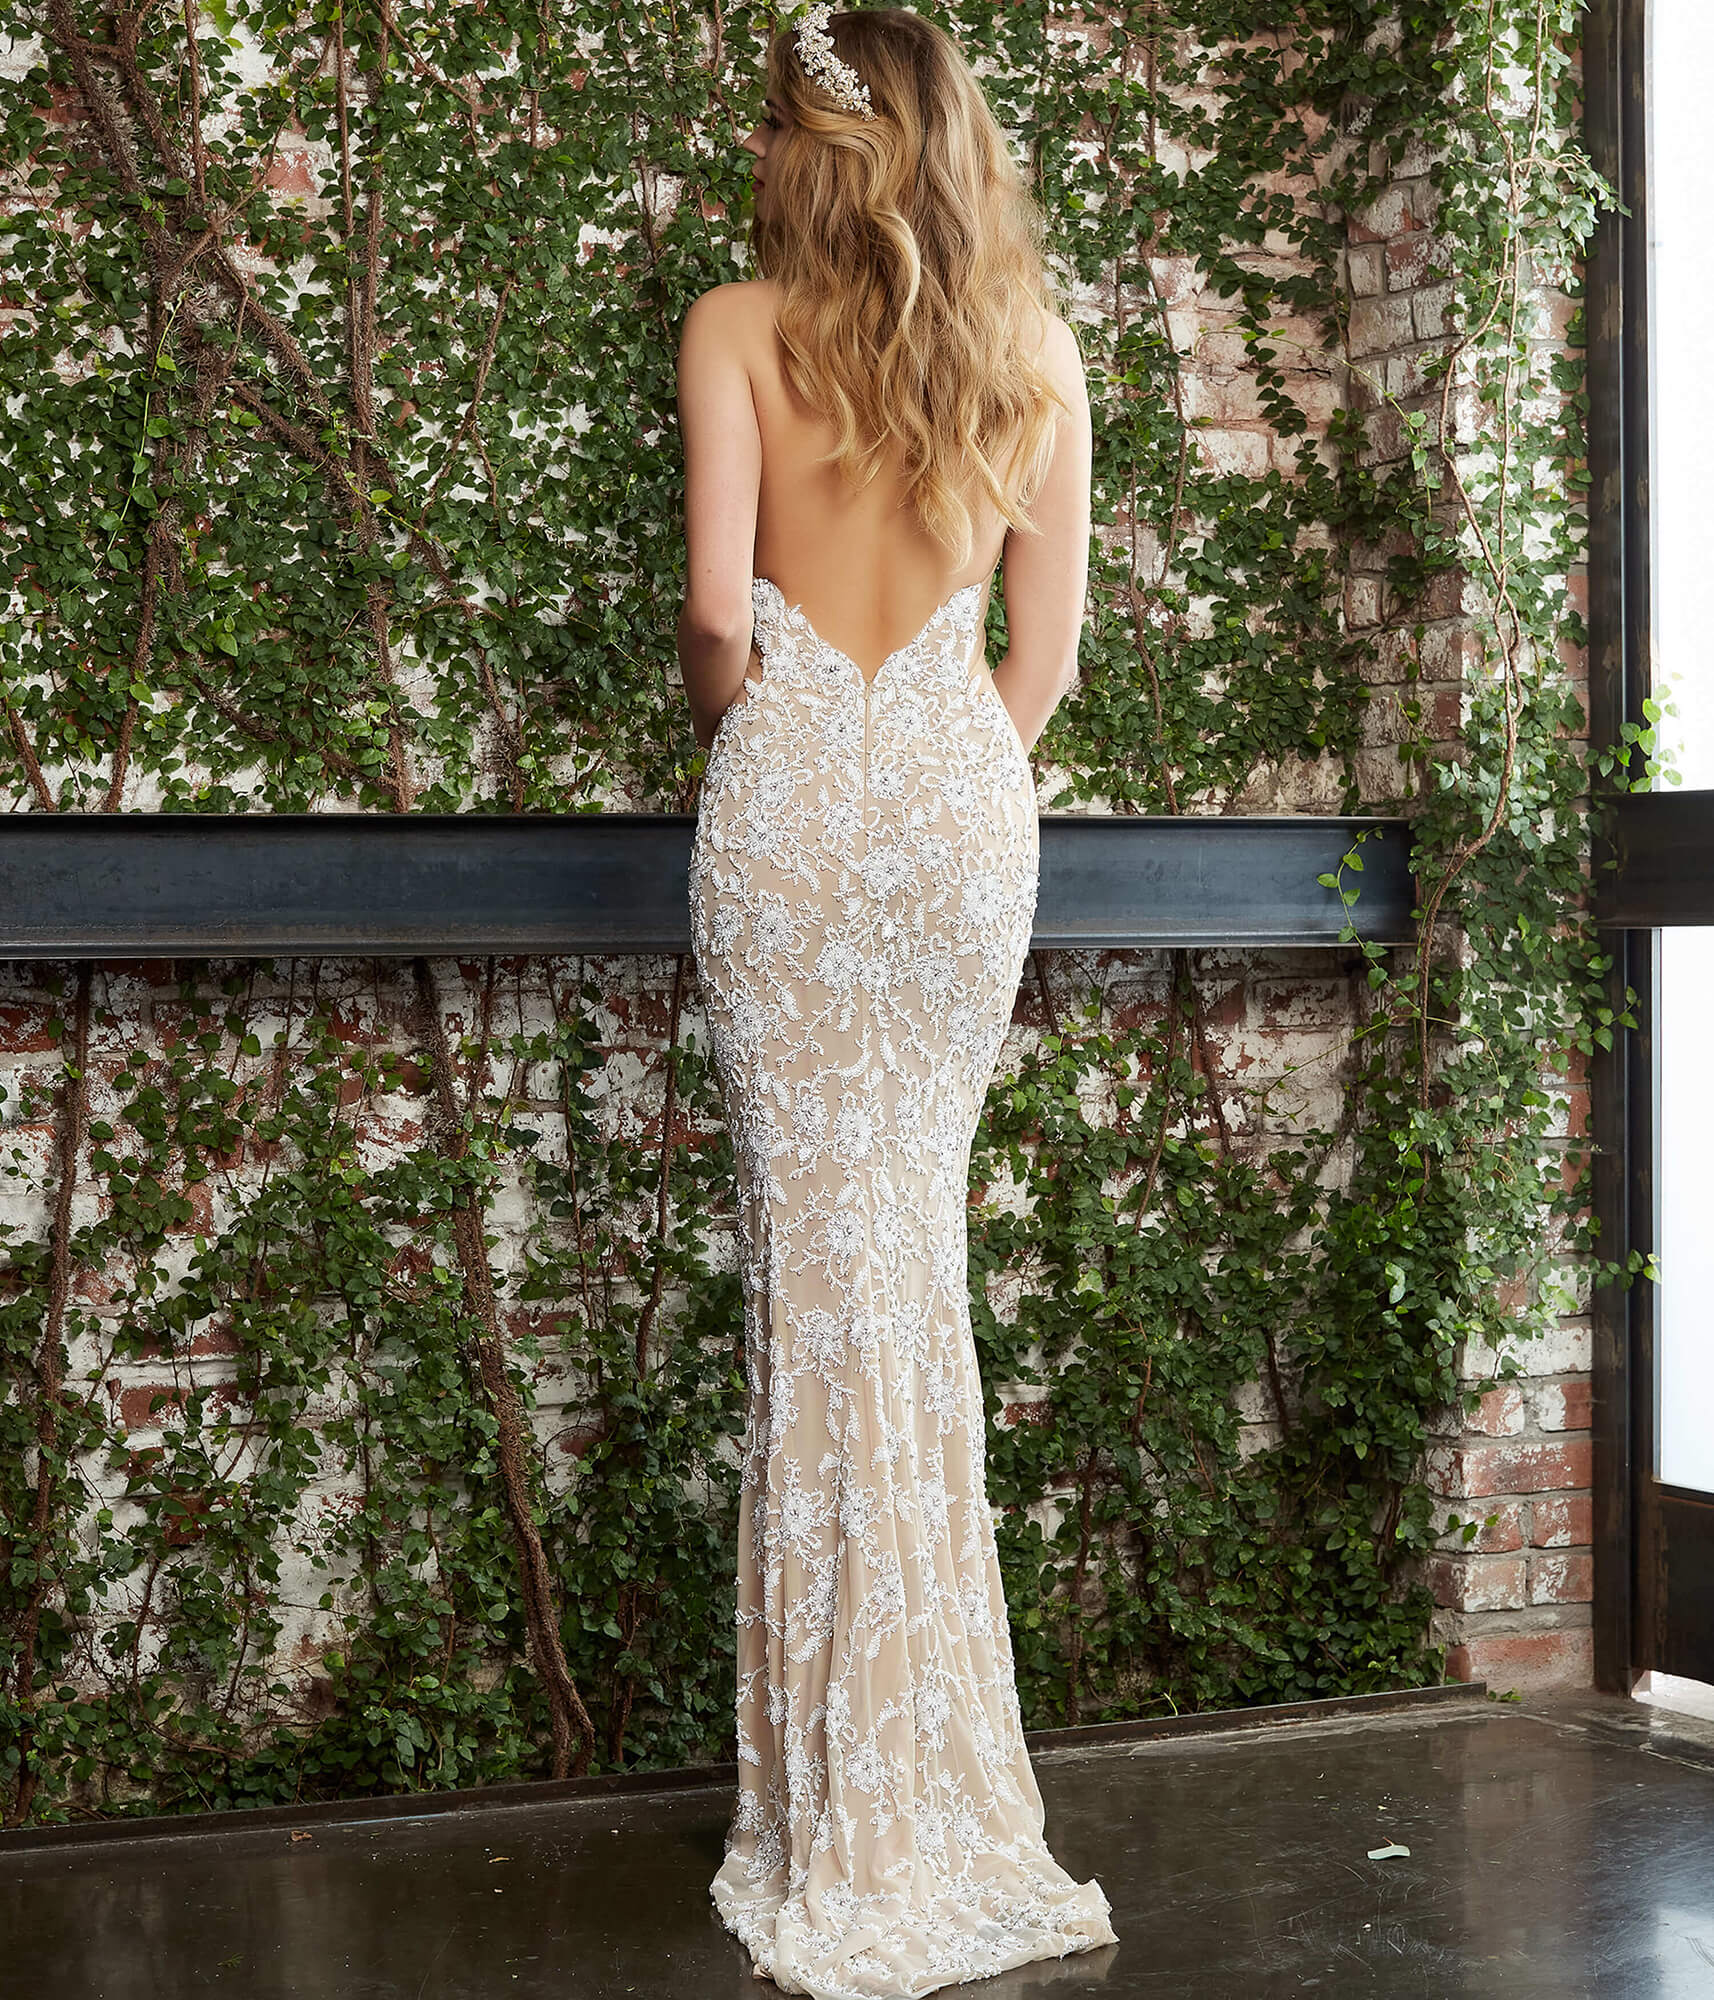 Jovani Bridal S48484 off white and nude wedding gown is encrusted in intricate floral beadwork, with a deep plunging halter neckline and an open back. Mesh side panels contour this fitted bridal dress, finished off with a sweep train. Halter Backless Fitted Beaded V Neck Wedding Dress Couture  Available Sizes: 00-24  Available Colors: Off White/Nude